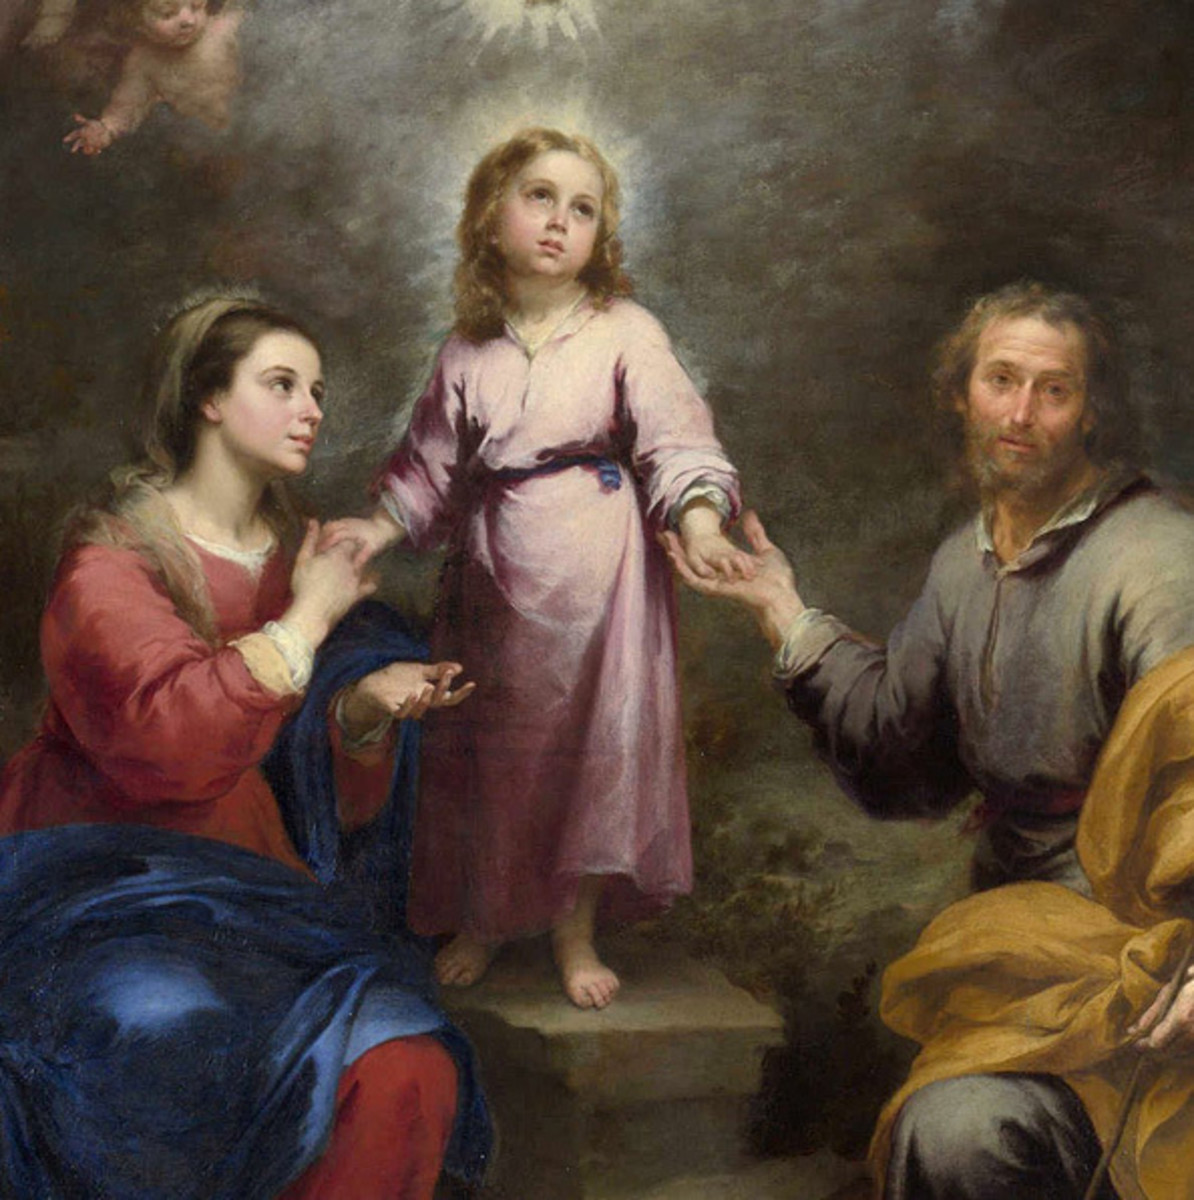 St. Joseph's Top 10 Virtues as Influenced by the Virgin Mary